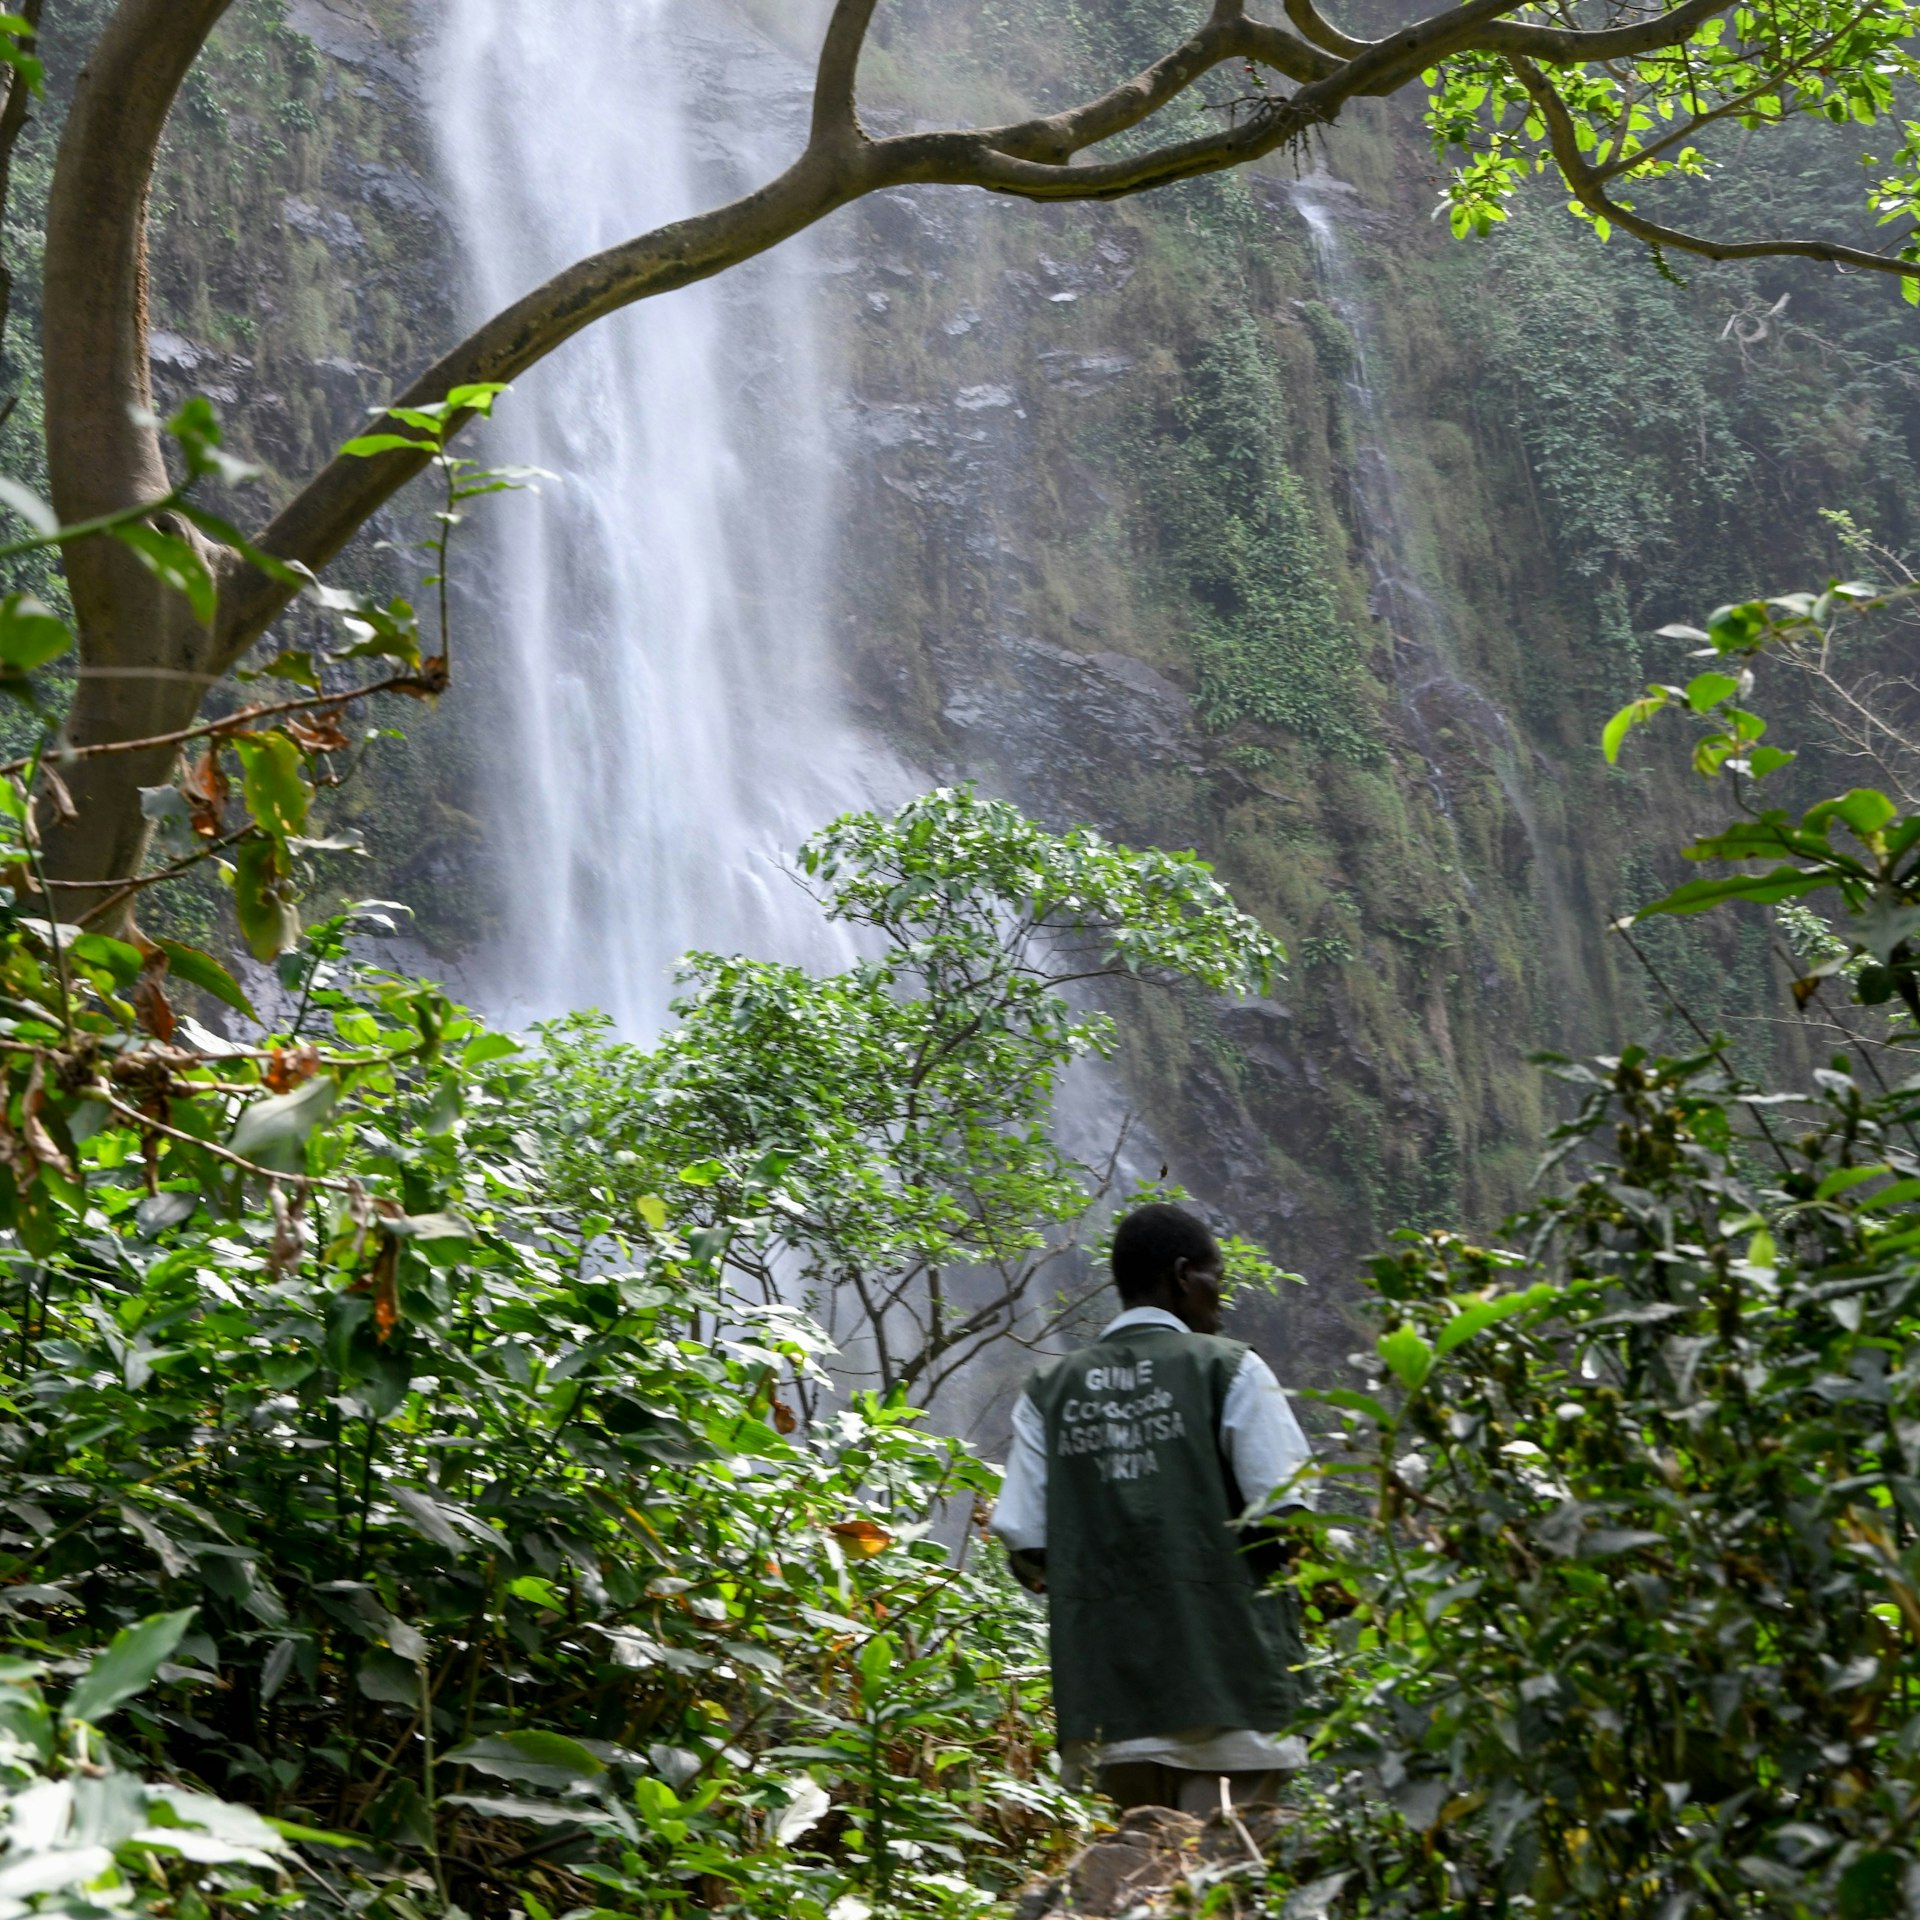 A man stands in the forest in front of Wli Falls, Ghana, West Africa